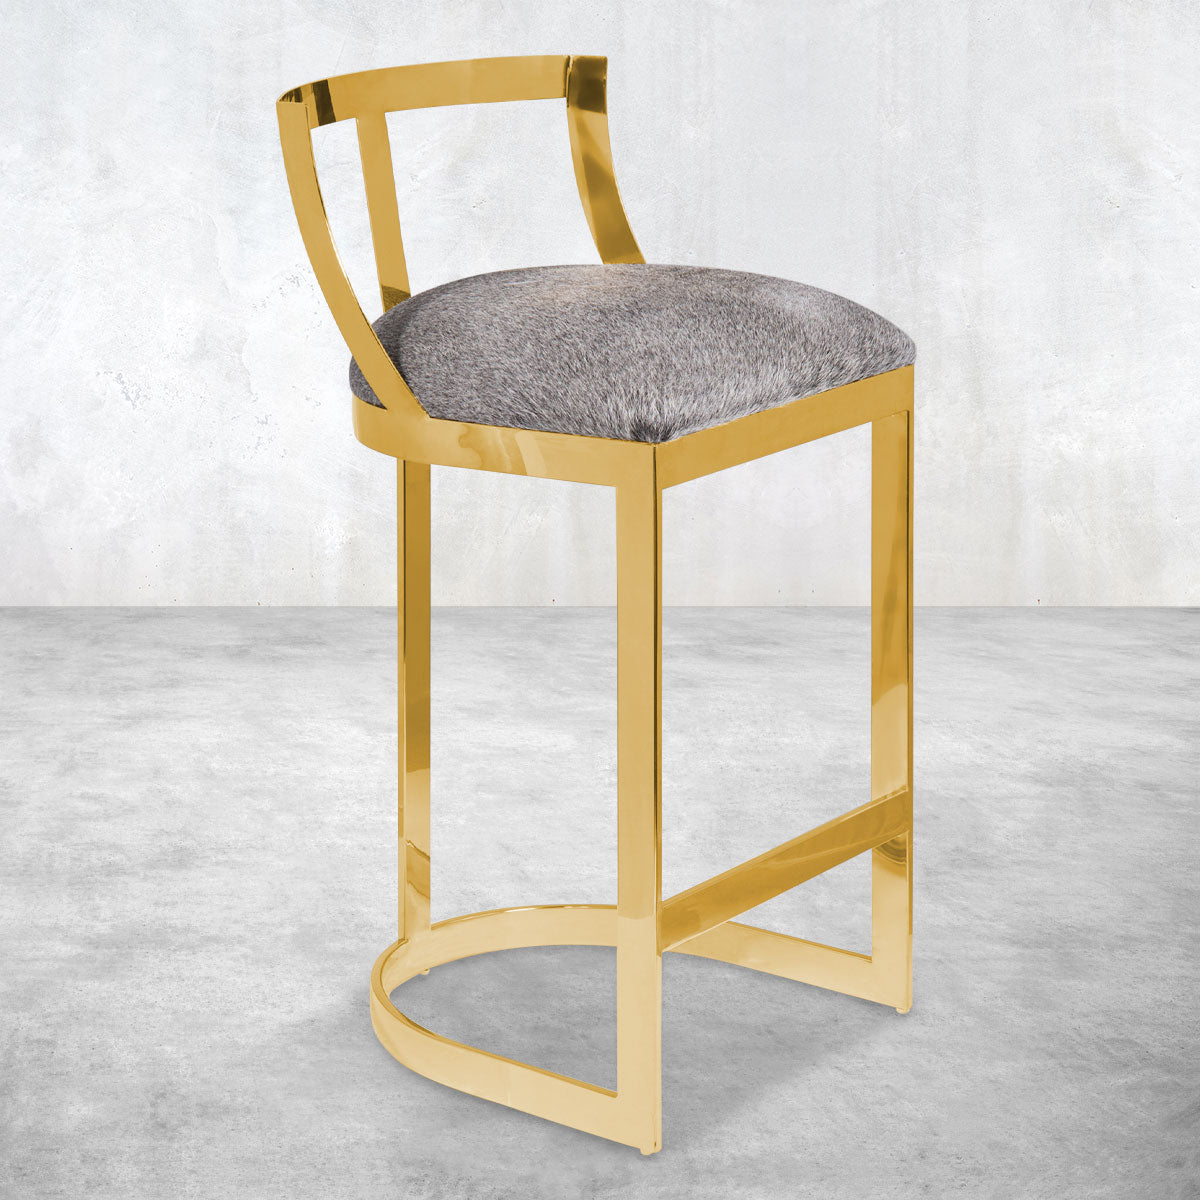 Polished brass bar counter stools with an open, brass framed back, a U-shape rounded base and plush gray upholstered seat.